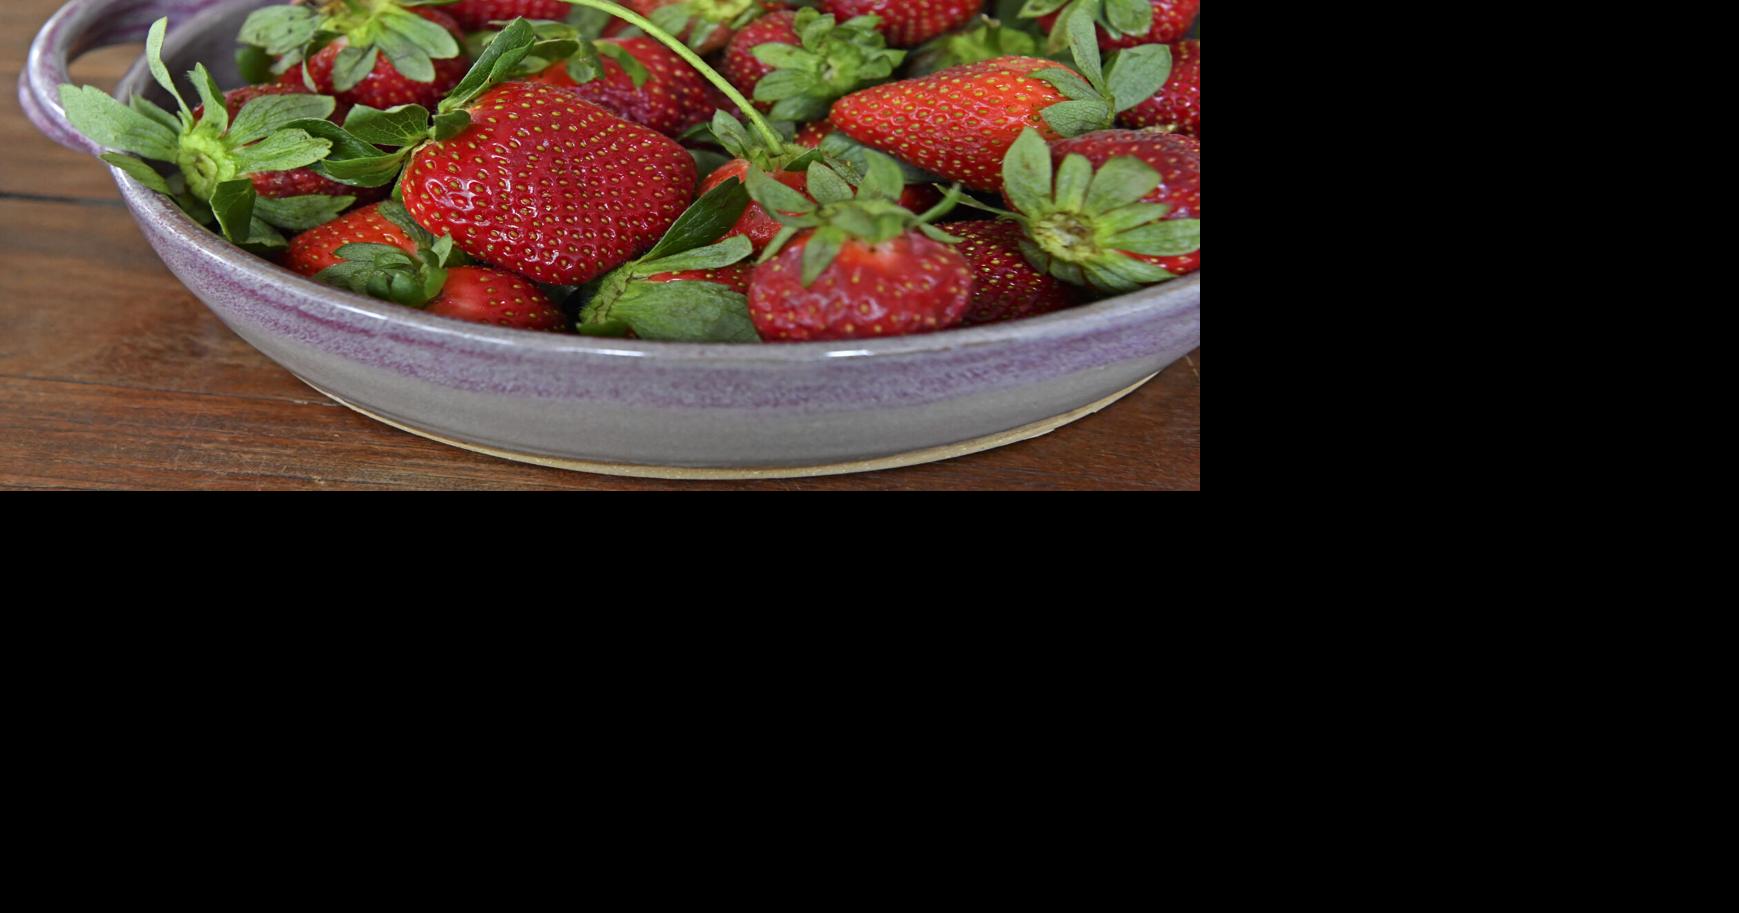 Plant strawberries now for a luscious spring harvest. Dan Gill explains which varieties to look for | Home/Garden